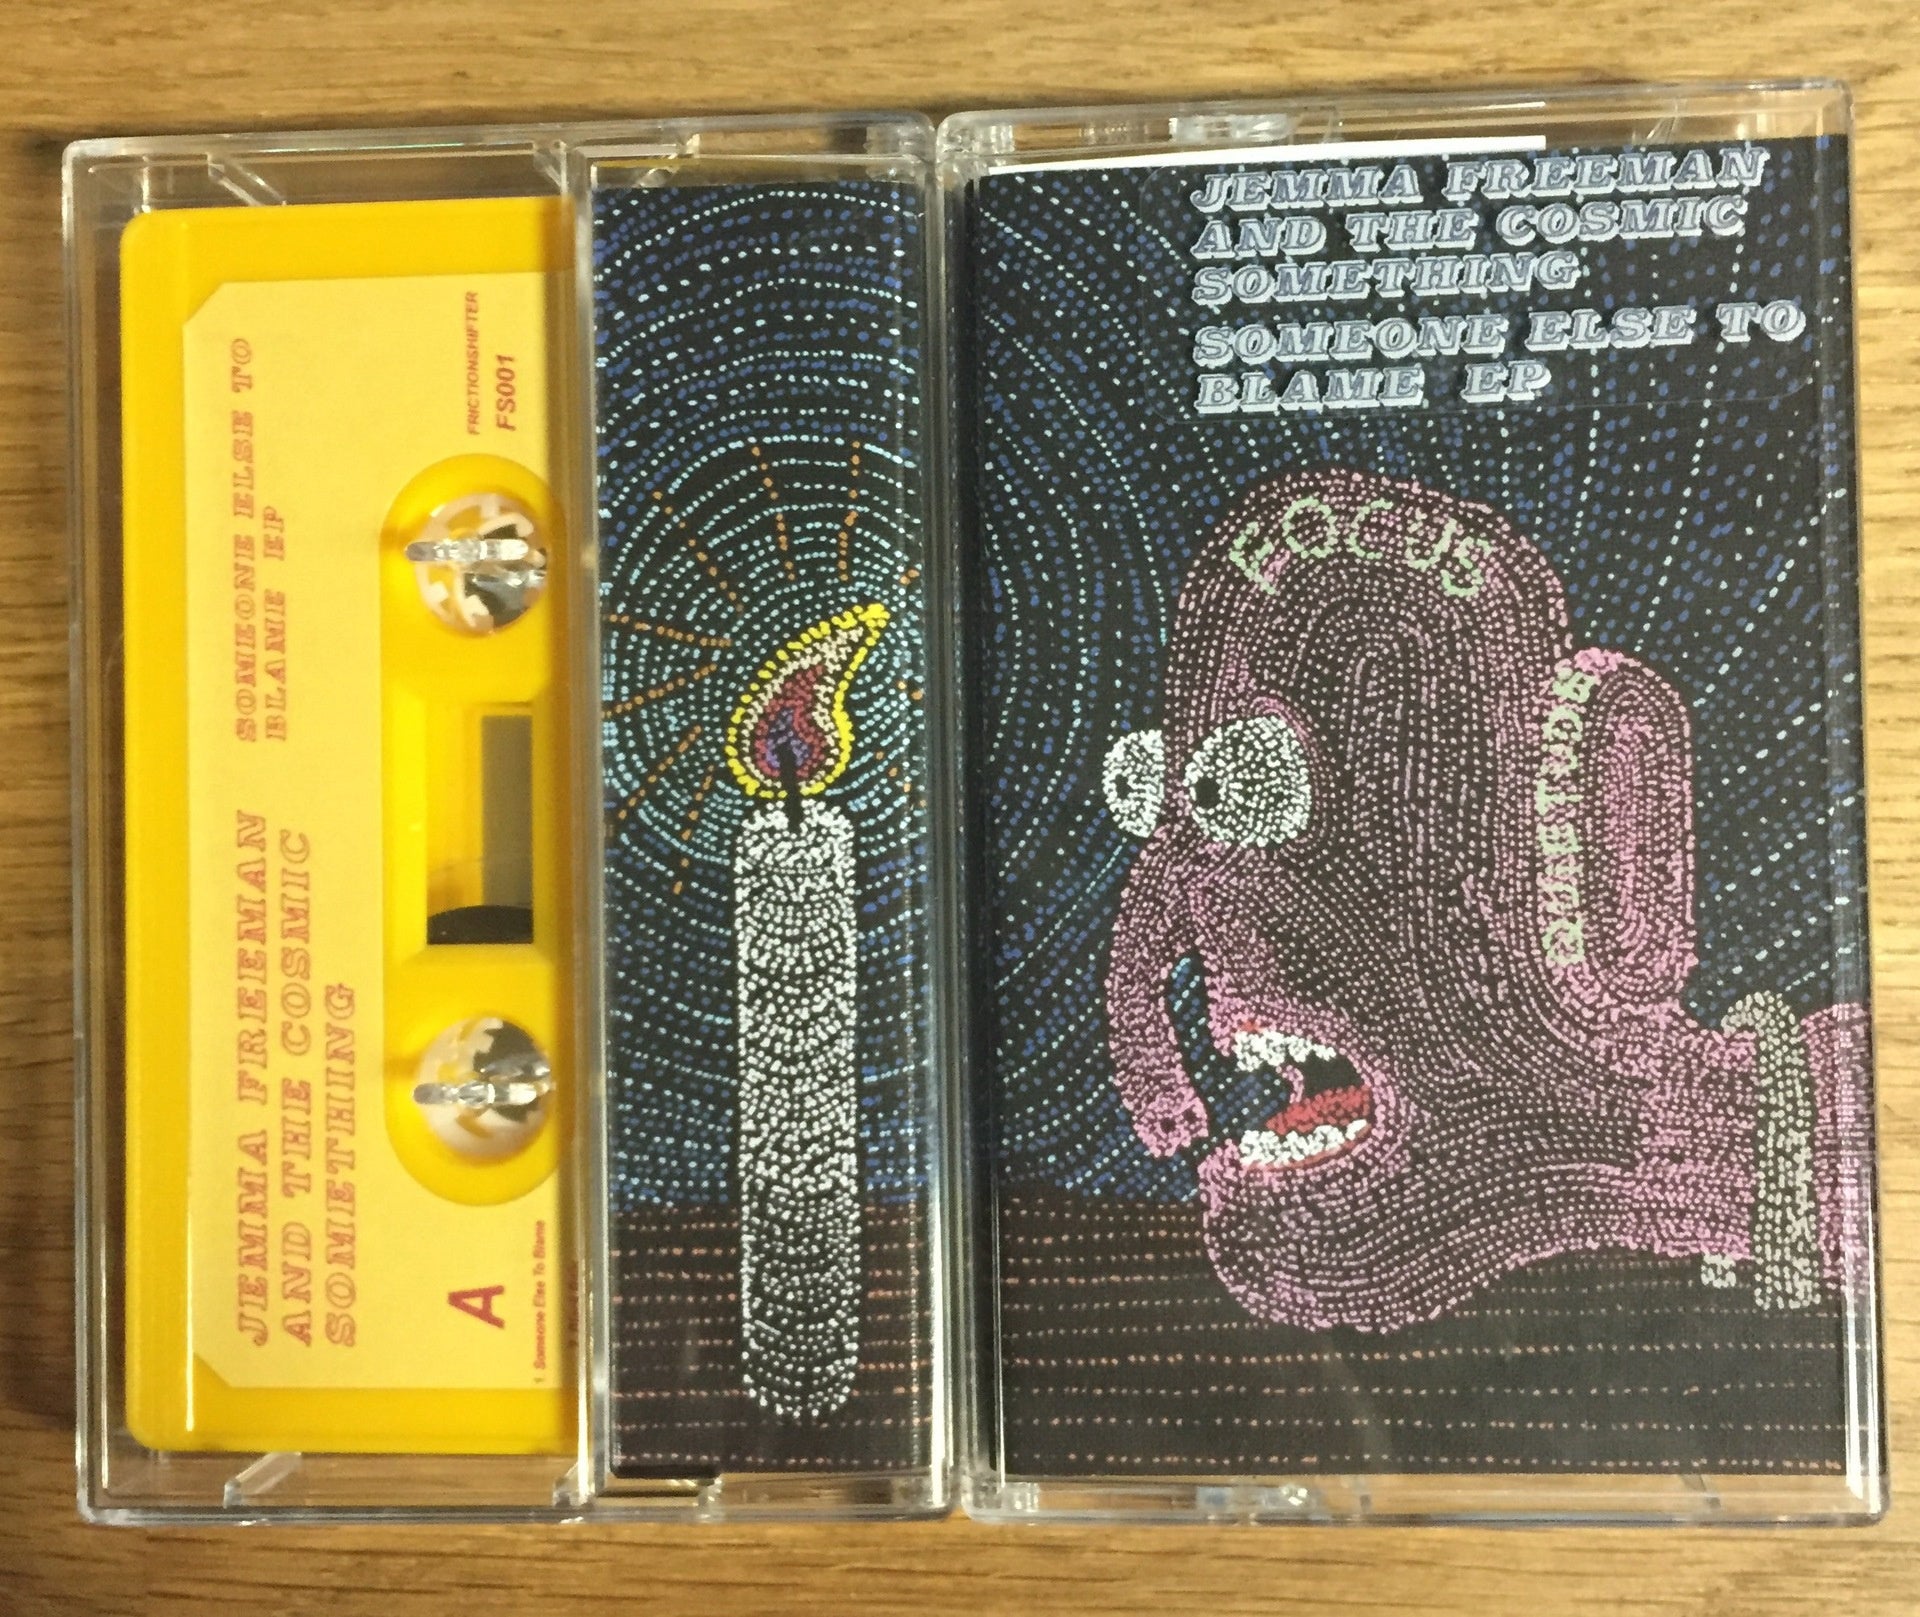 Jemma Freeman & The Cosmic Something - Someone Else to Blame EP - New Cassette - 2017 Friction Shifter Limited Edition Yellow Tape (Only 100 Made!) - UK Alt / Dream Pop